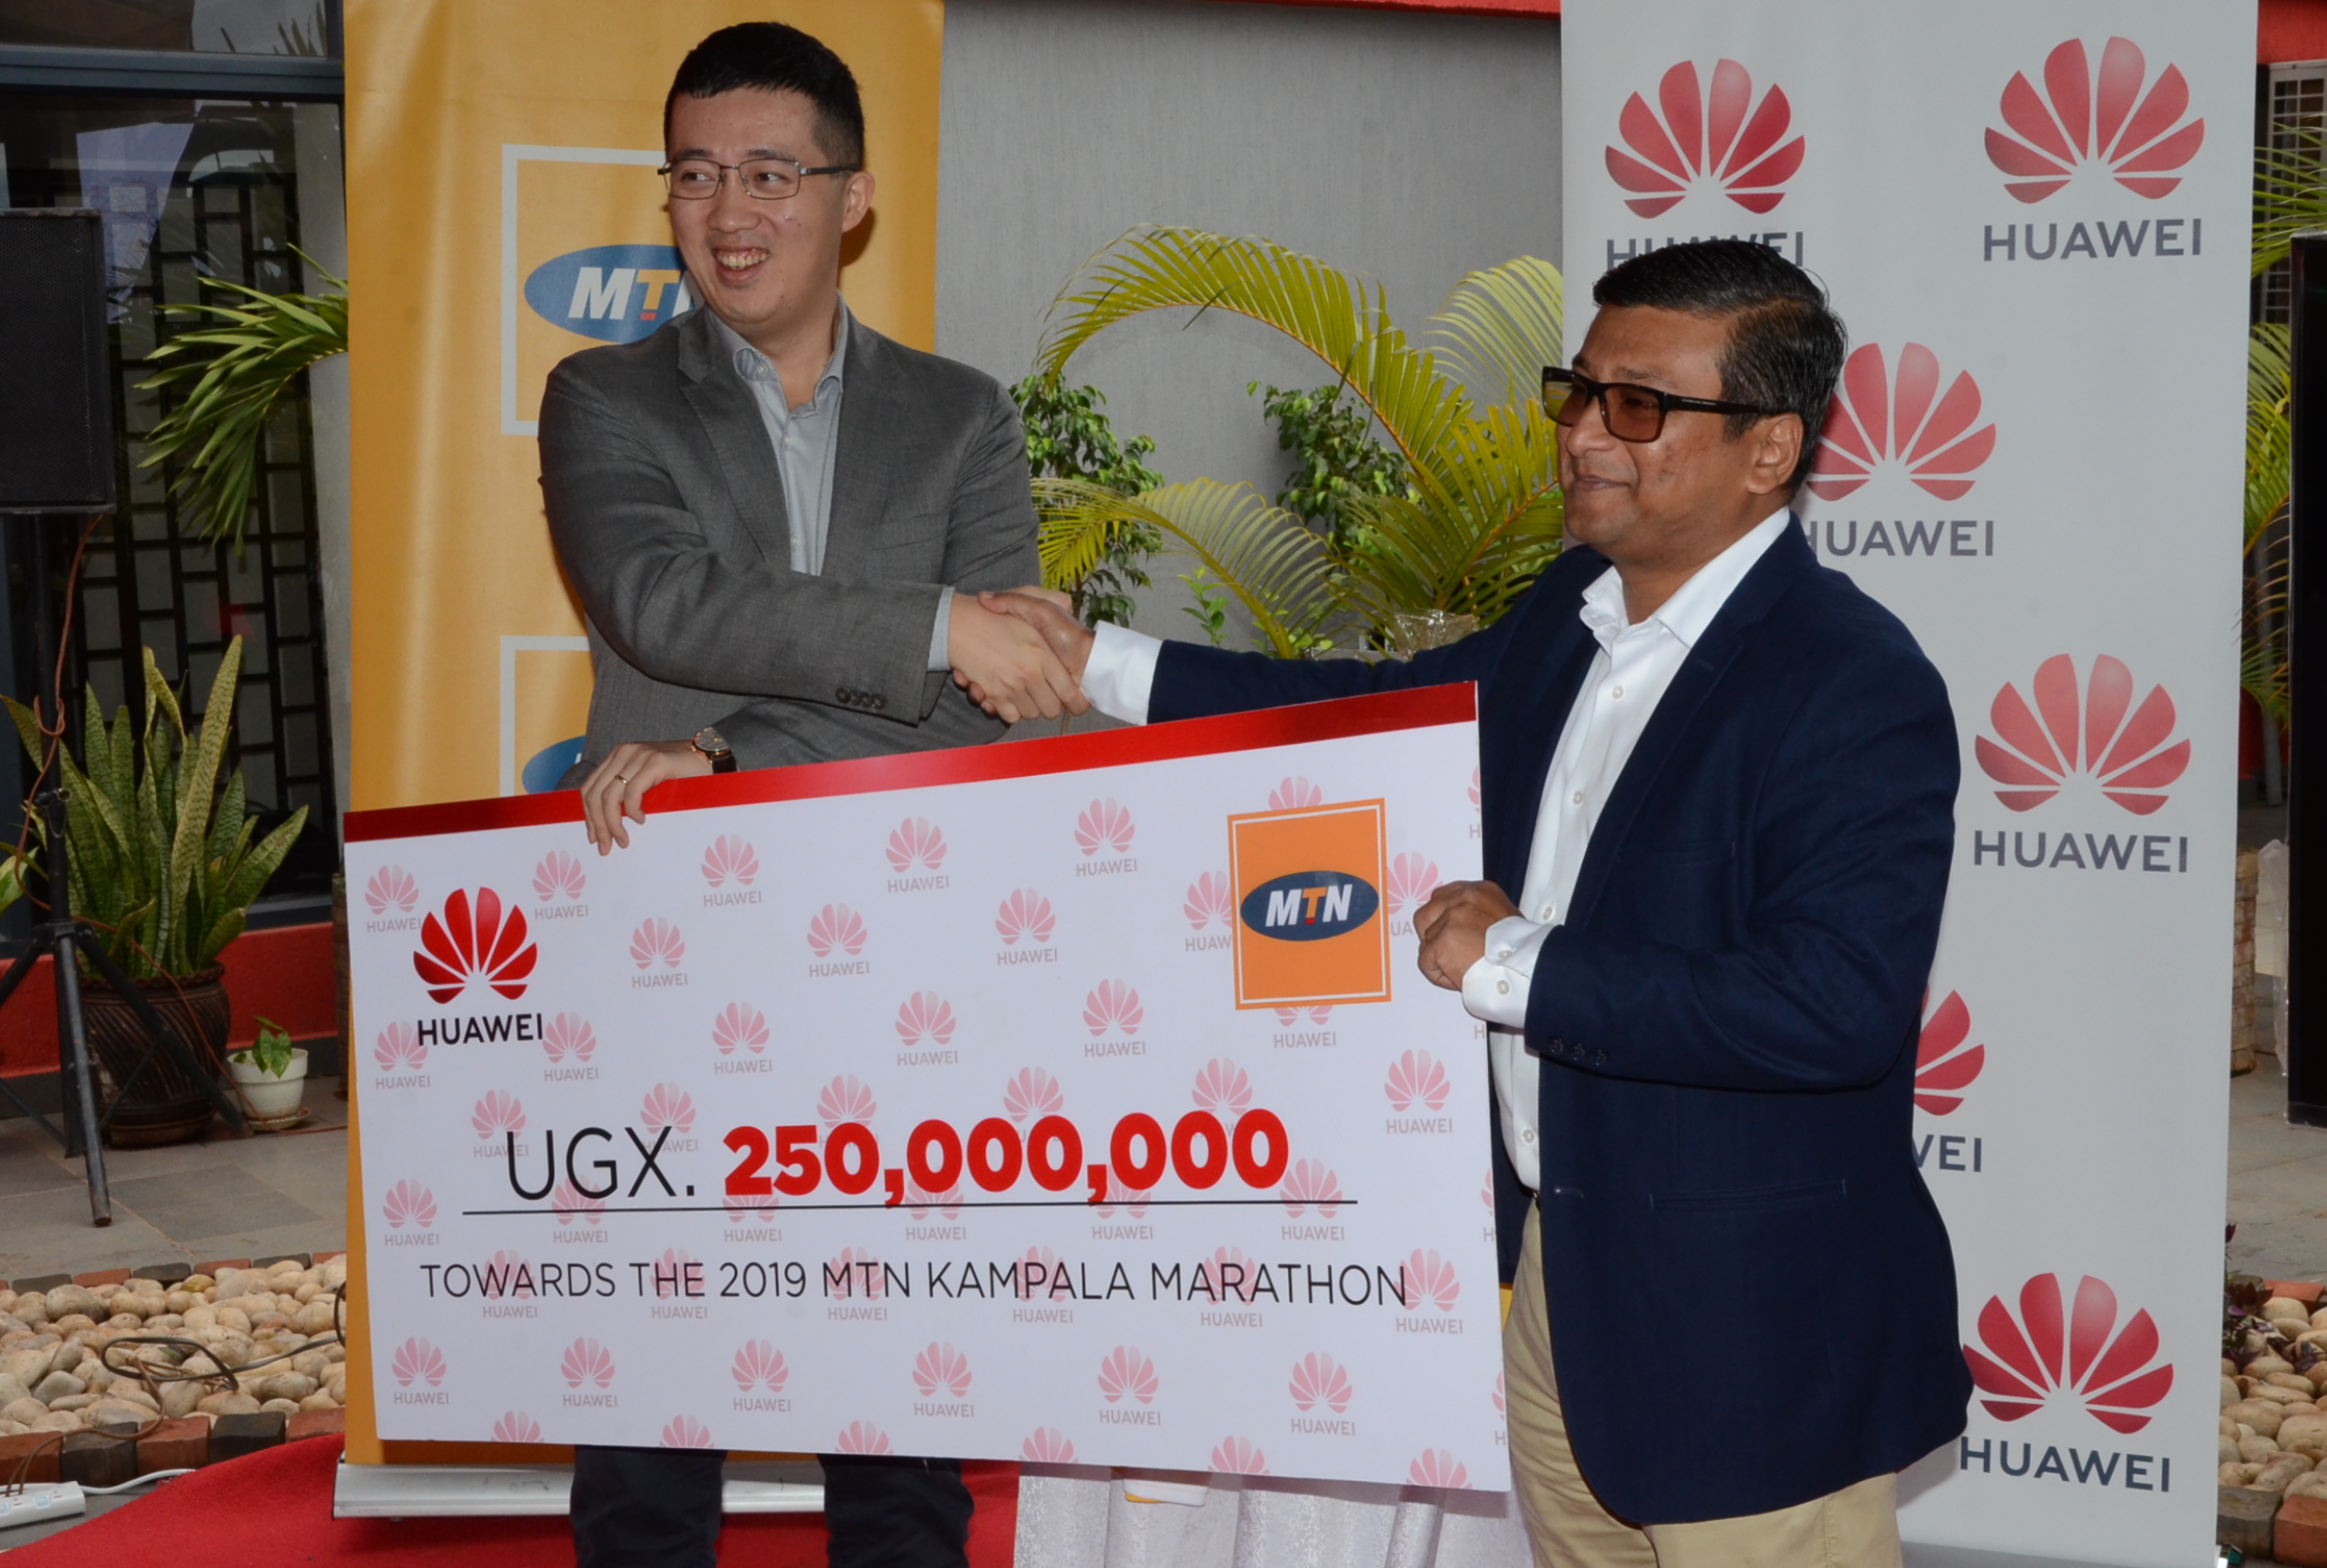 Huawei Gives 250,000,000 shillings to Maternal Health Care in Uganda